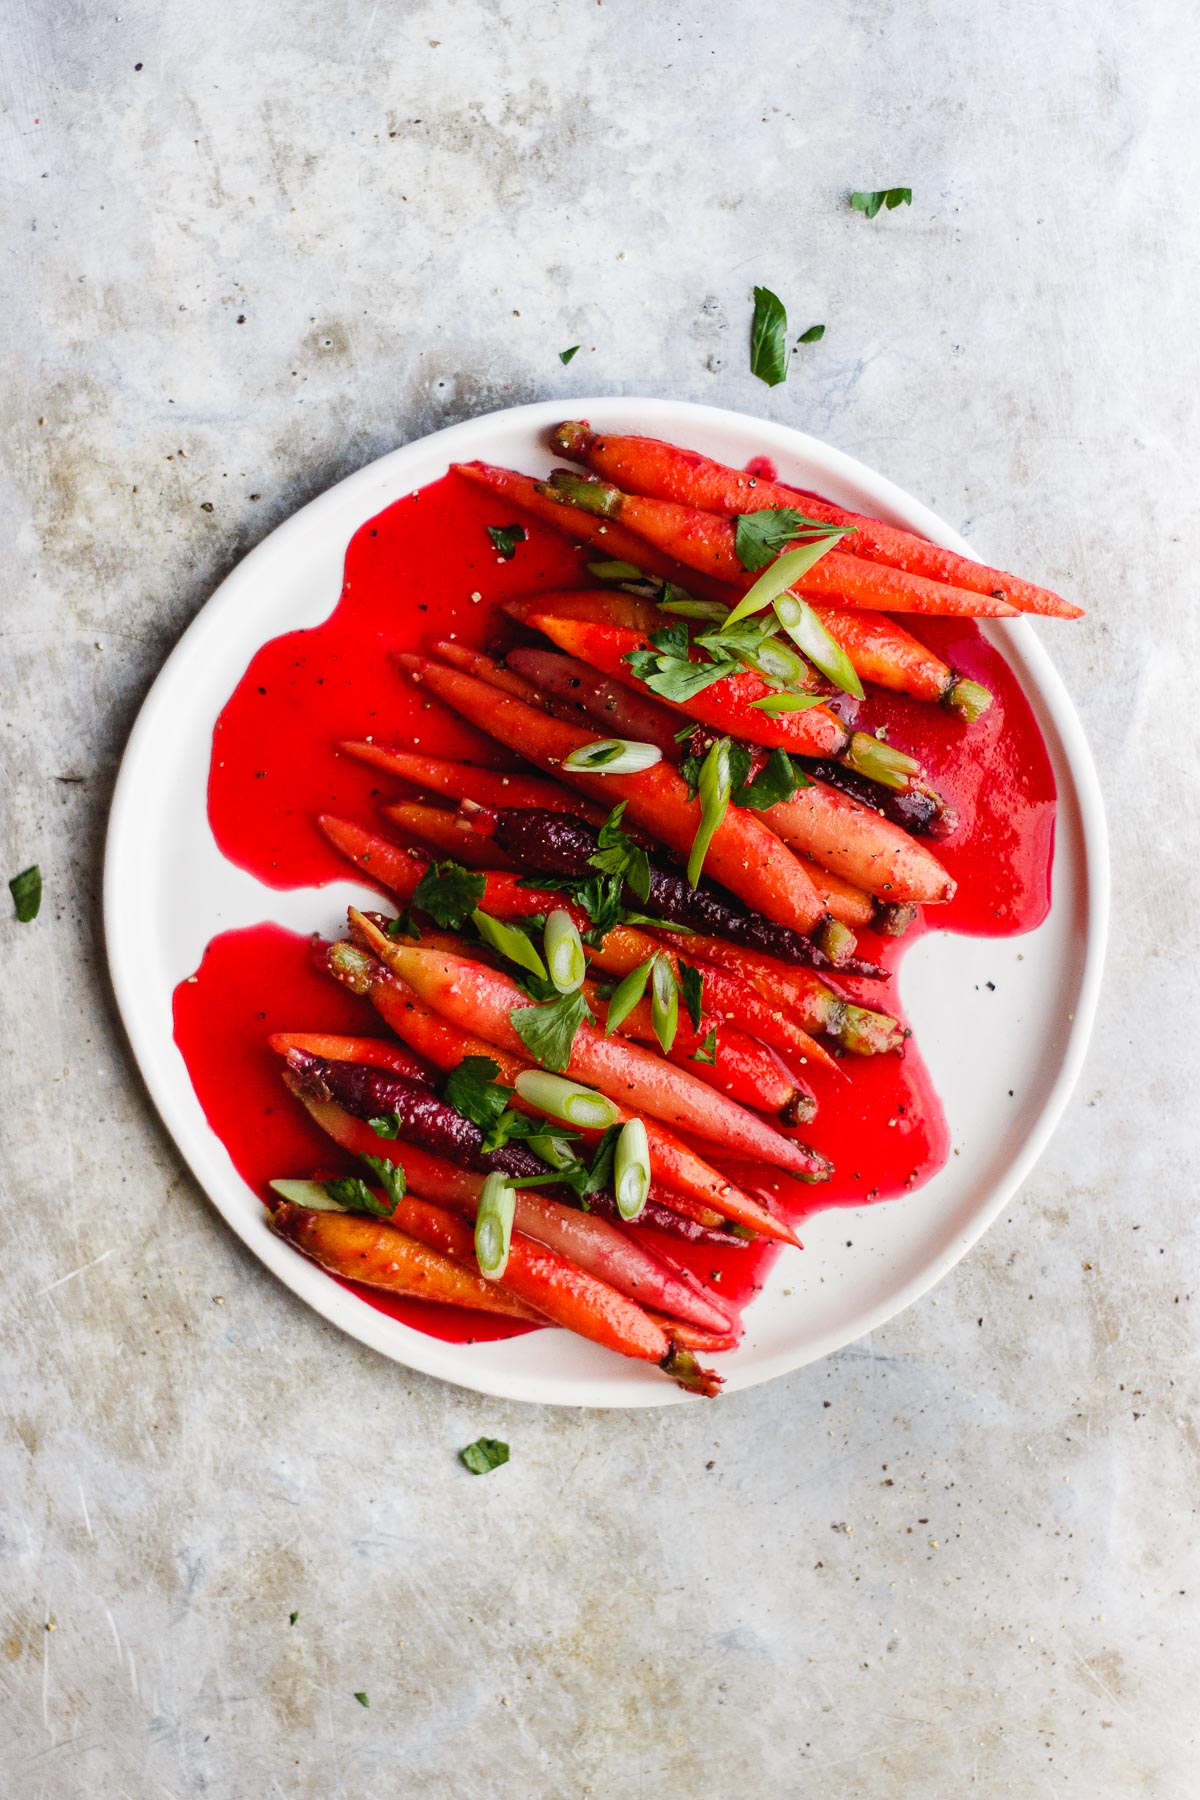 CRANBERRY GLAZED CARROTS WITH PINK PEPPERCORNS